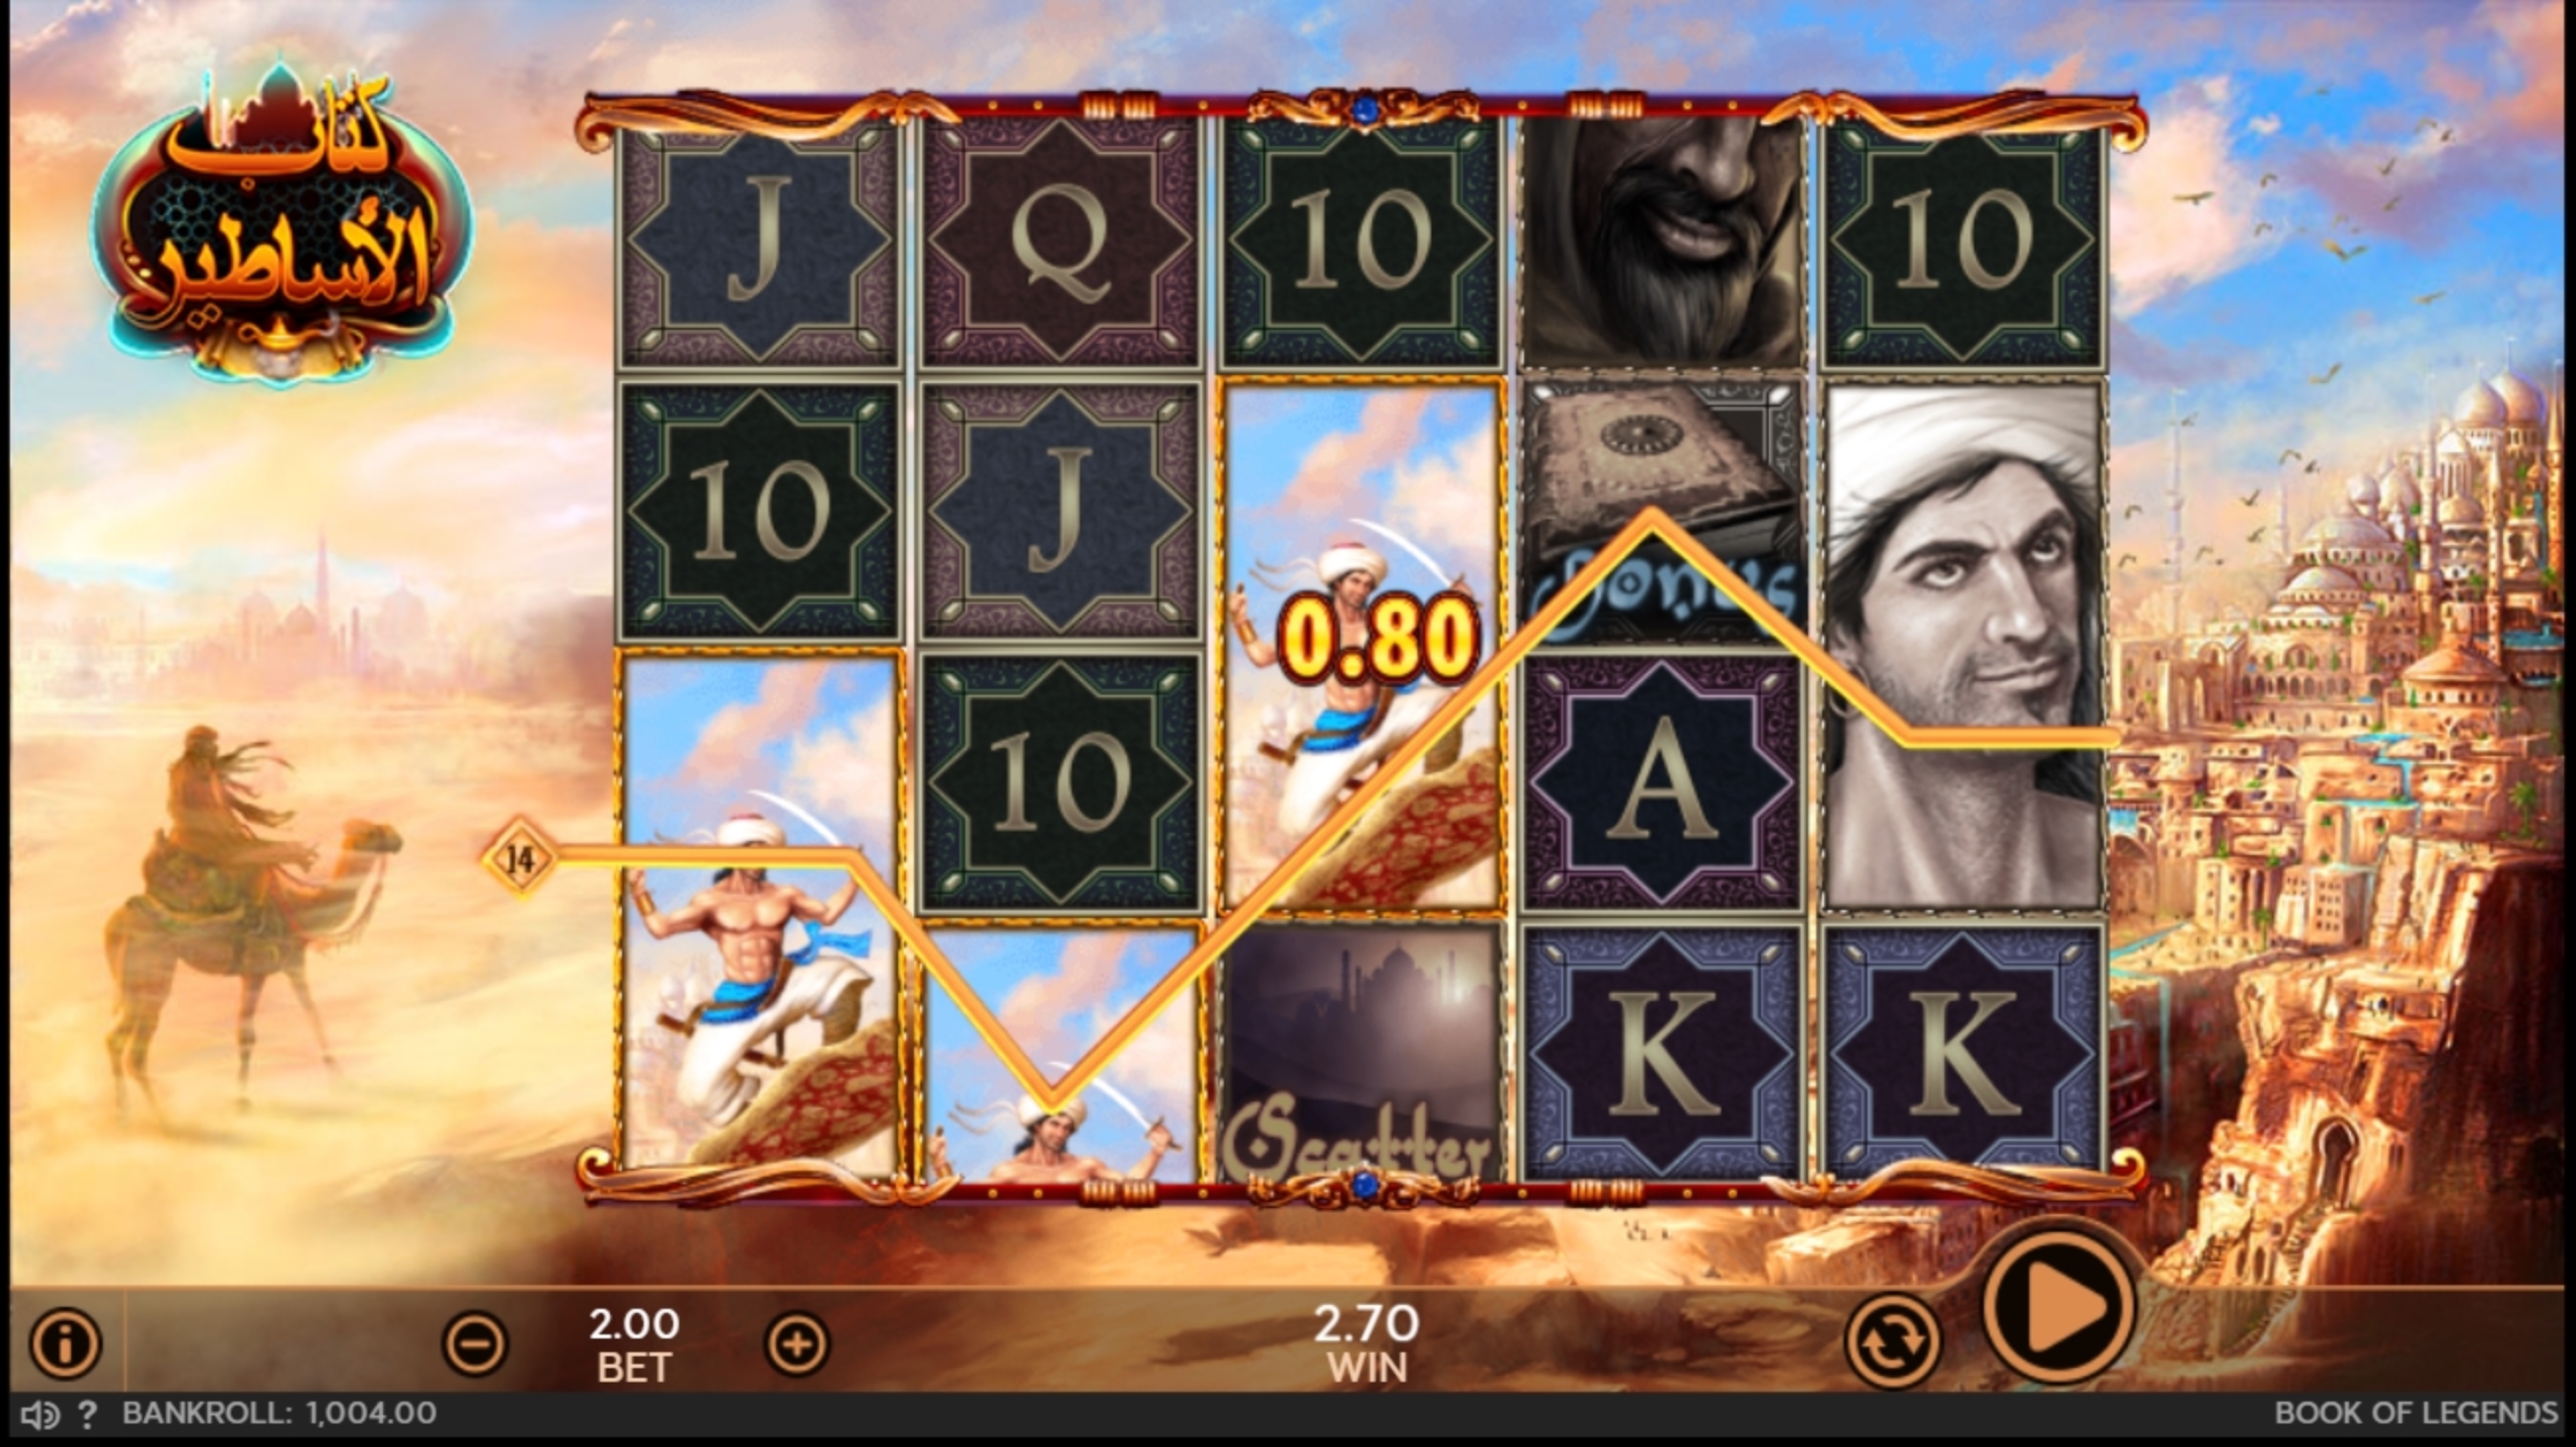 Win Money in Book of Legends Free Slot Game by 888 Gaming